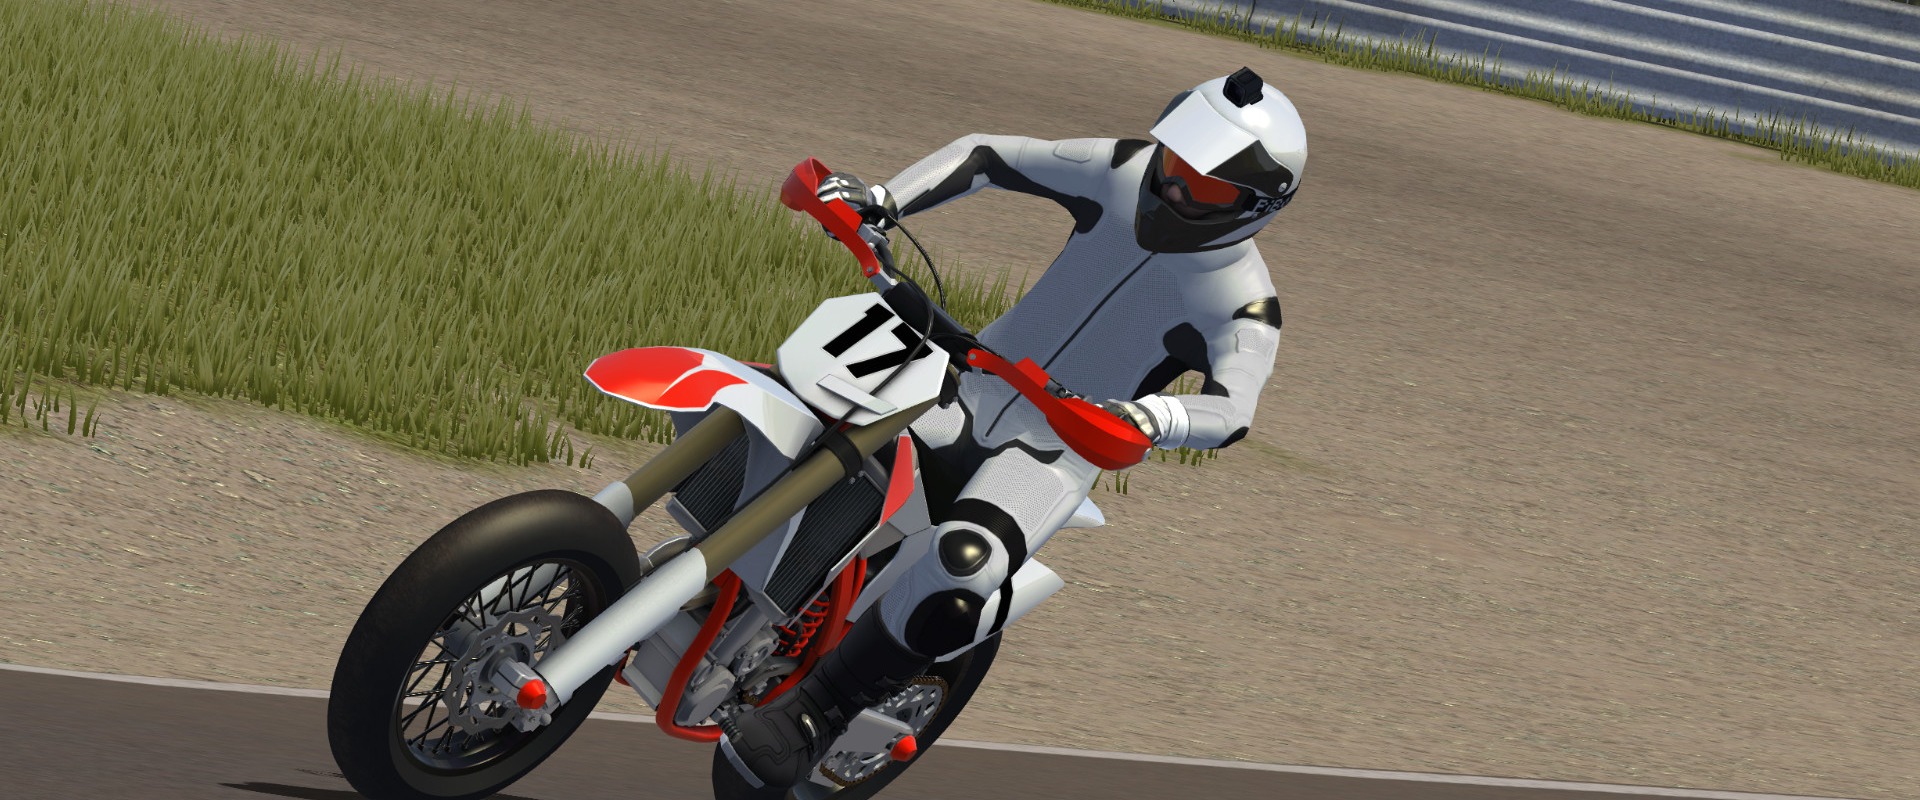 Most Popular and Trending Motocross Video Game on Xbox One